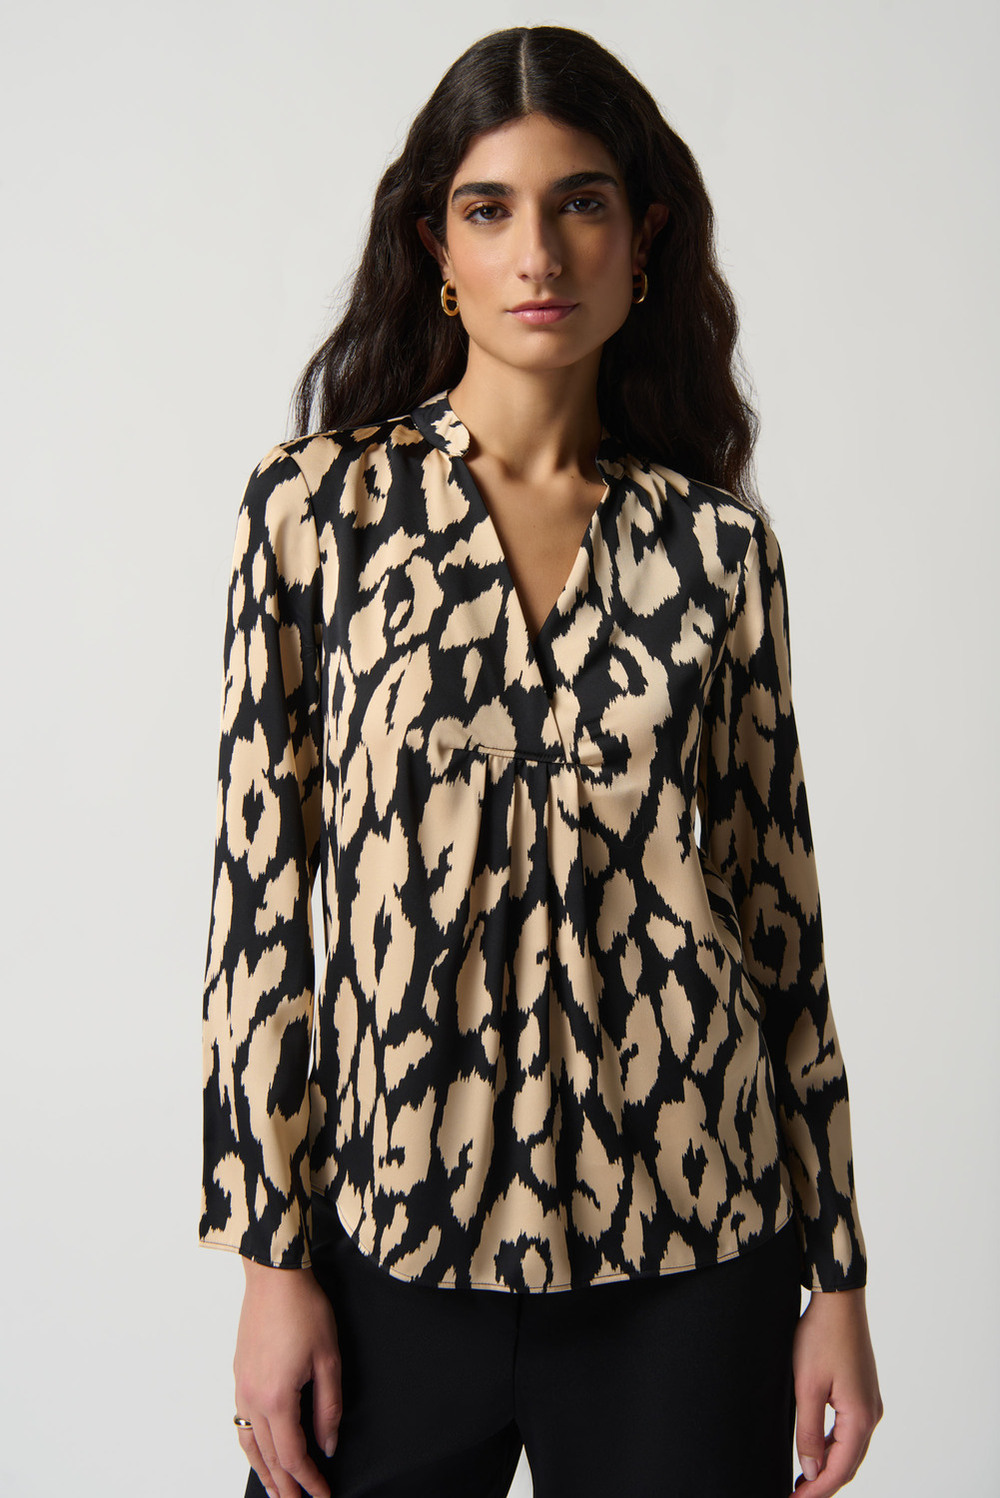 Abstract Animal Print Top Style 234077. Black/beige